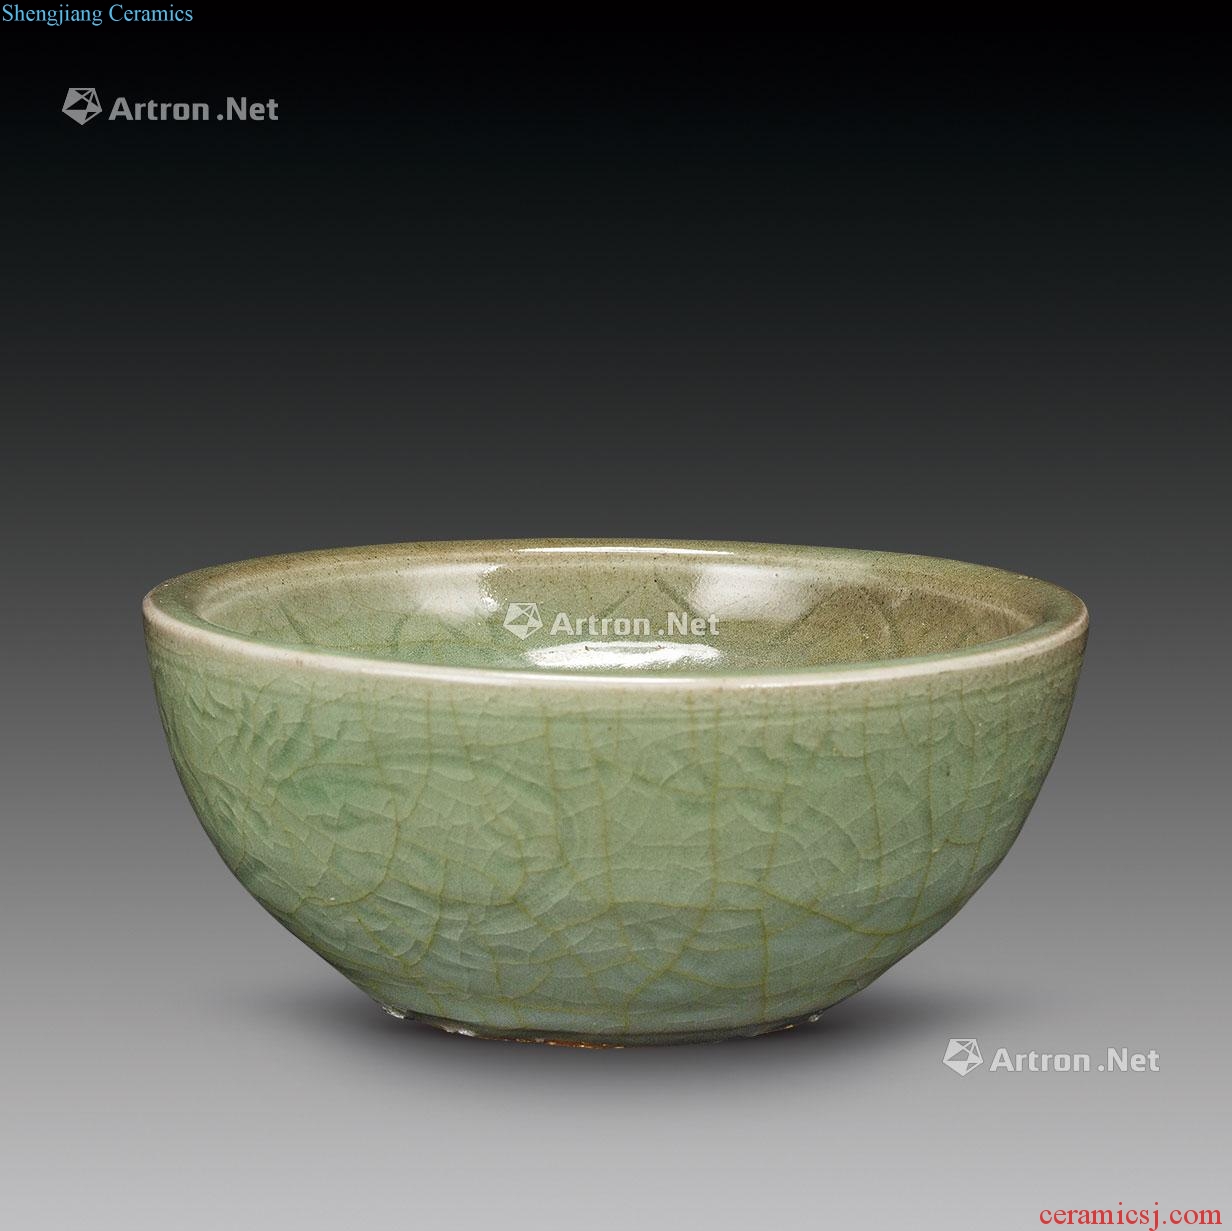 Newest - Yuan to early - Ming Dynasty LONGQUAN up CARVED ZHUGE BOWL